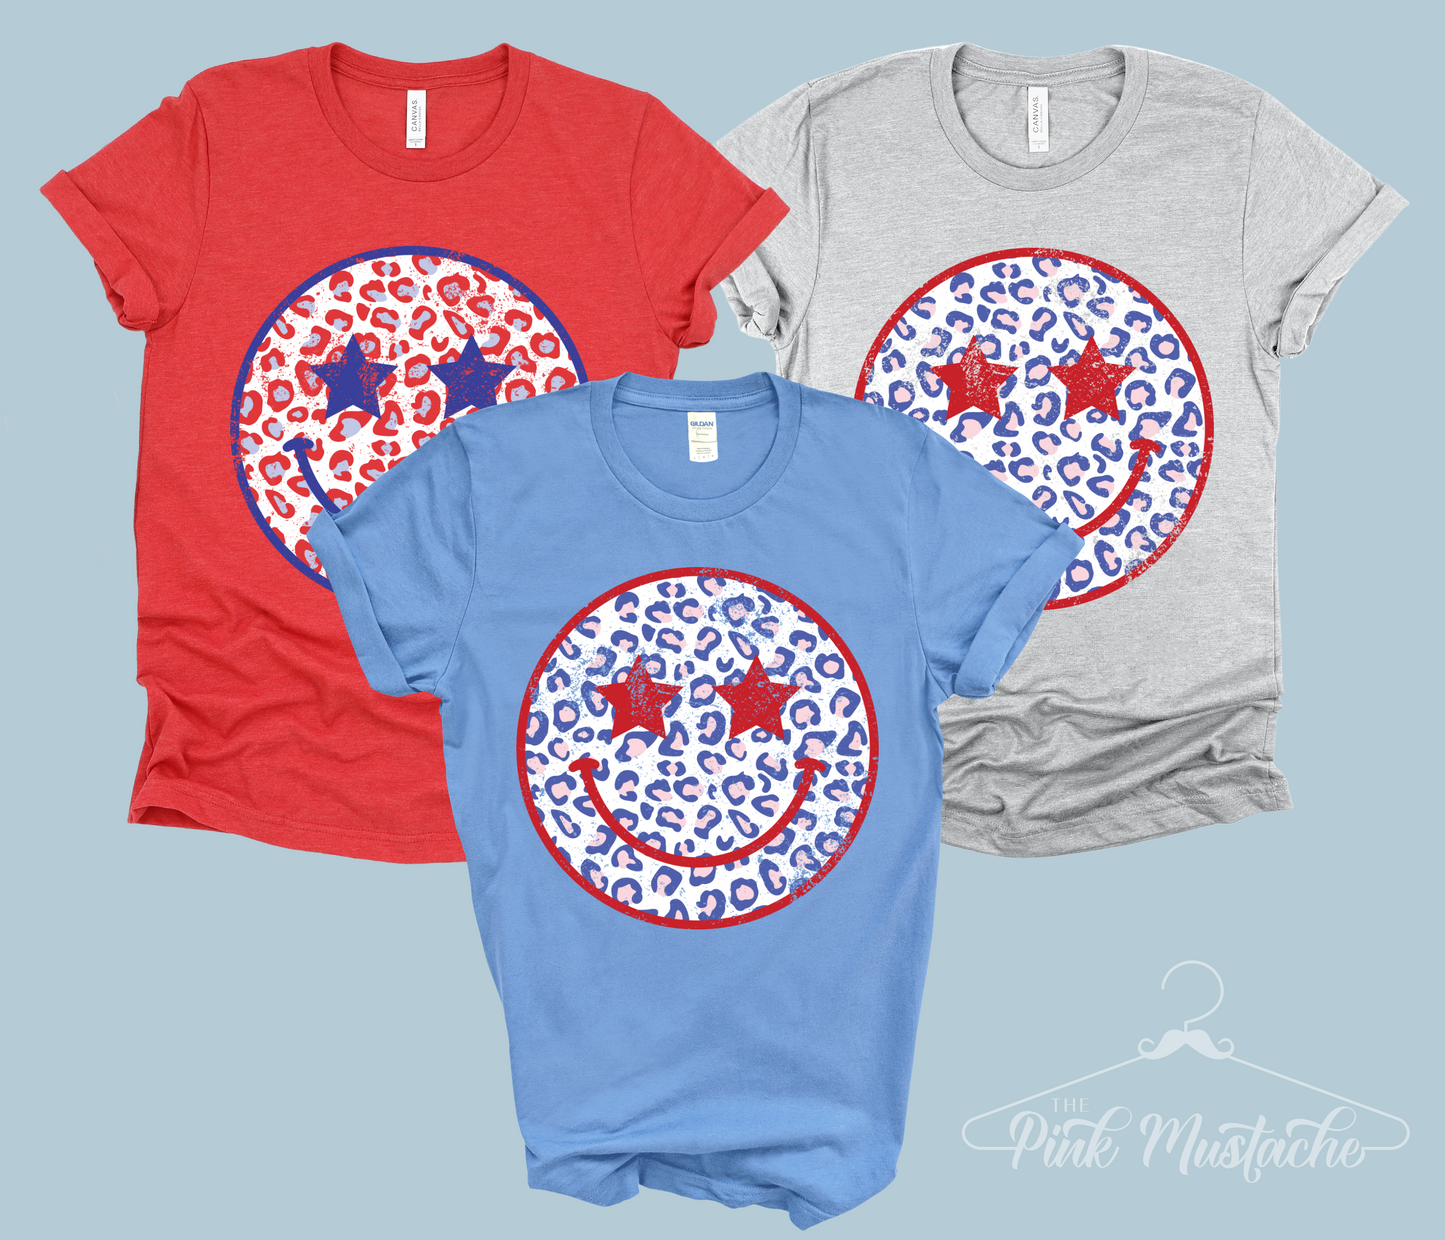 USA Leopard Smiley July 4th Toddler, Youth, and Adult Shirt / Memorial Day July 4th Tee/ Retro Style Shirt